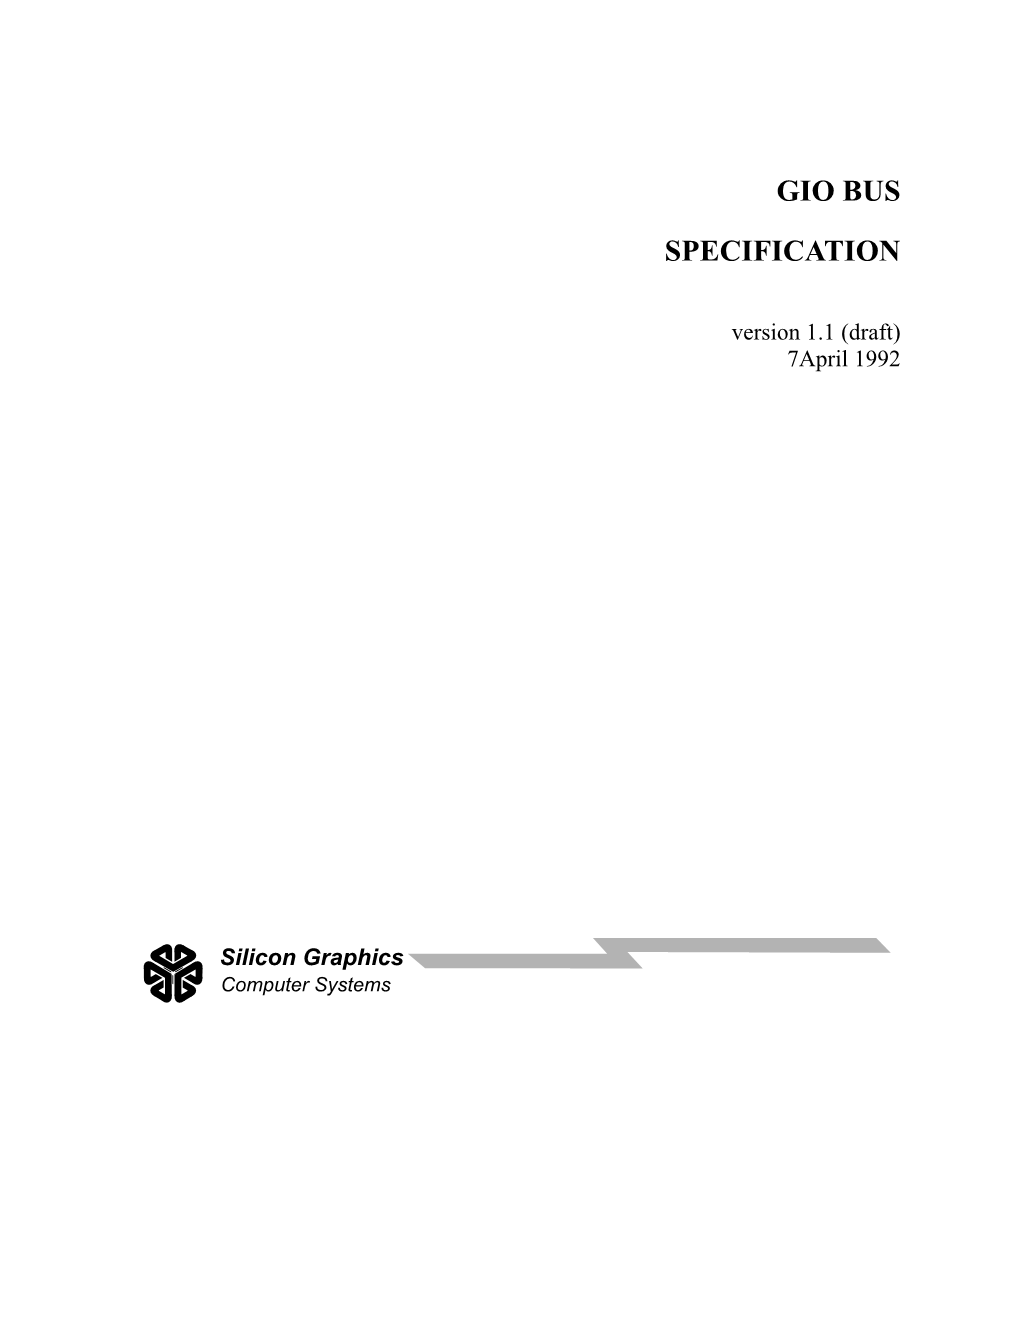 Gio Bus Specification